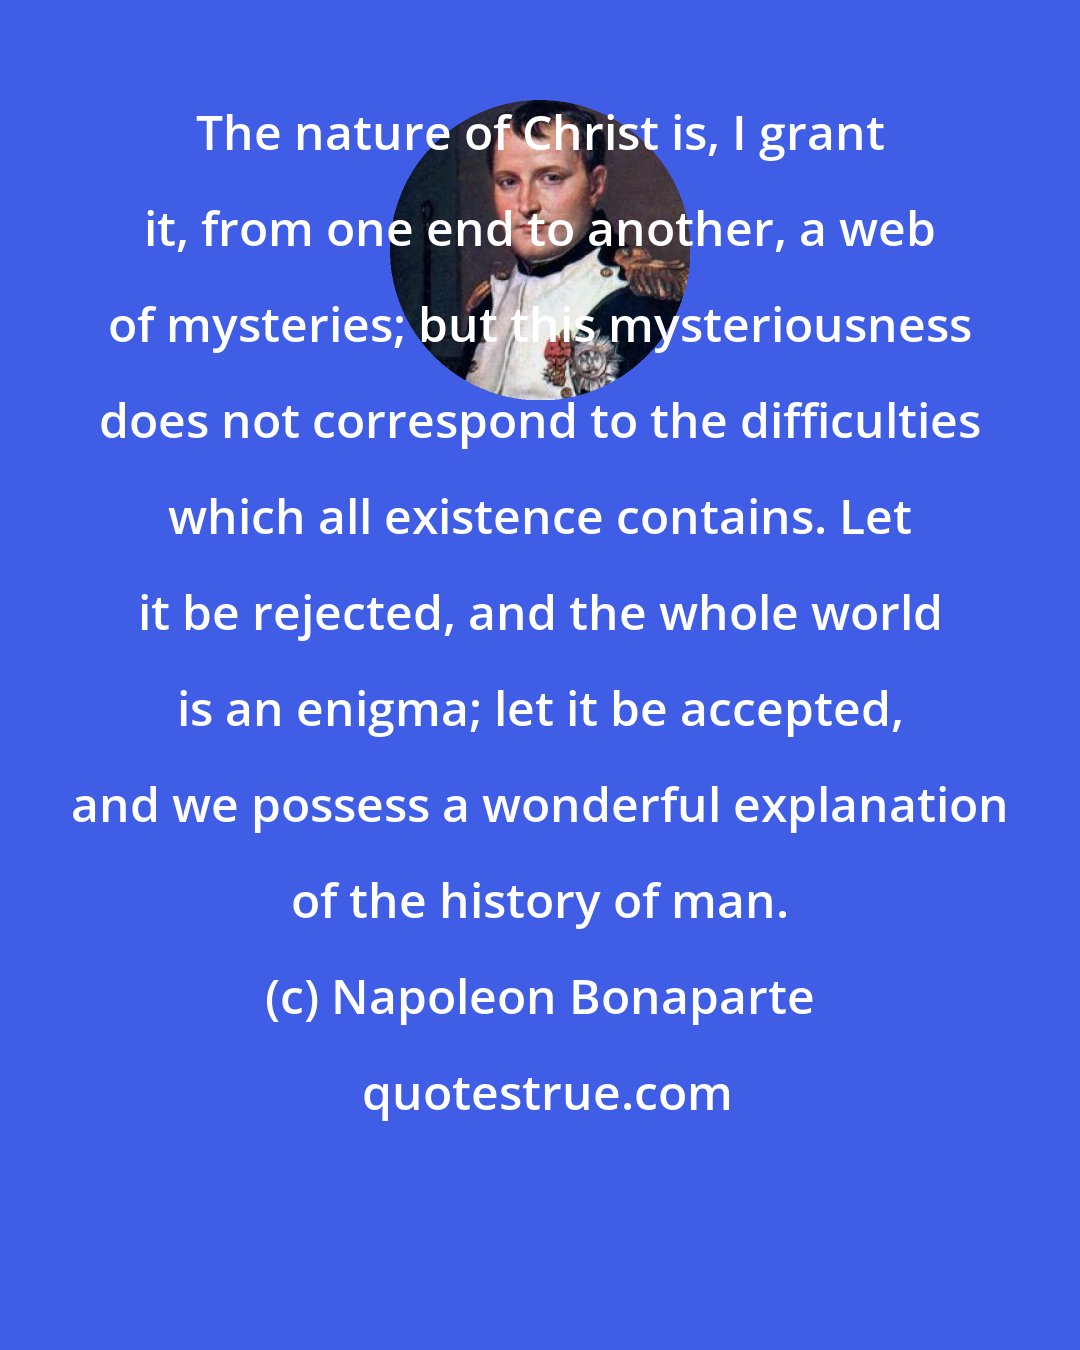 Napoleon Bonaparte: The nature of Christ is, I grant it, from one end to another, a web of mysteries; but this mysteriousness does not correspond to the difficulties which all existence contains. Let it be rejected, and the whole world is an enigma; let it be accepted, and we possess a wonderful explanation of the history of man.